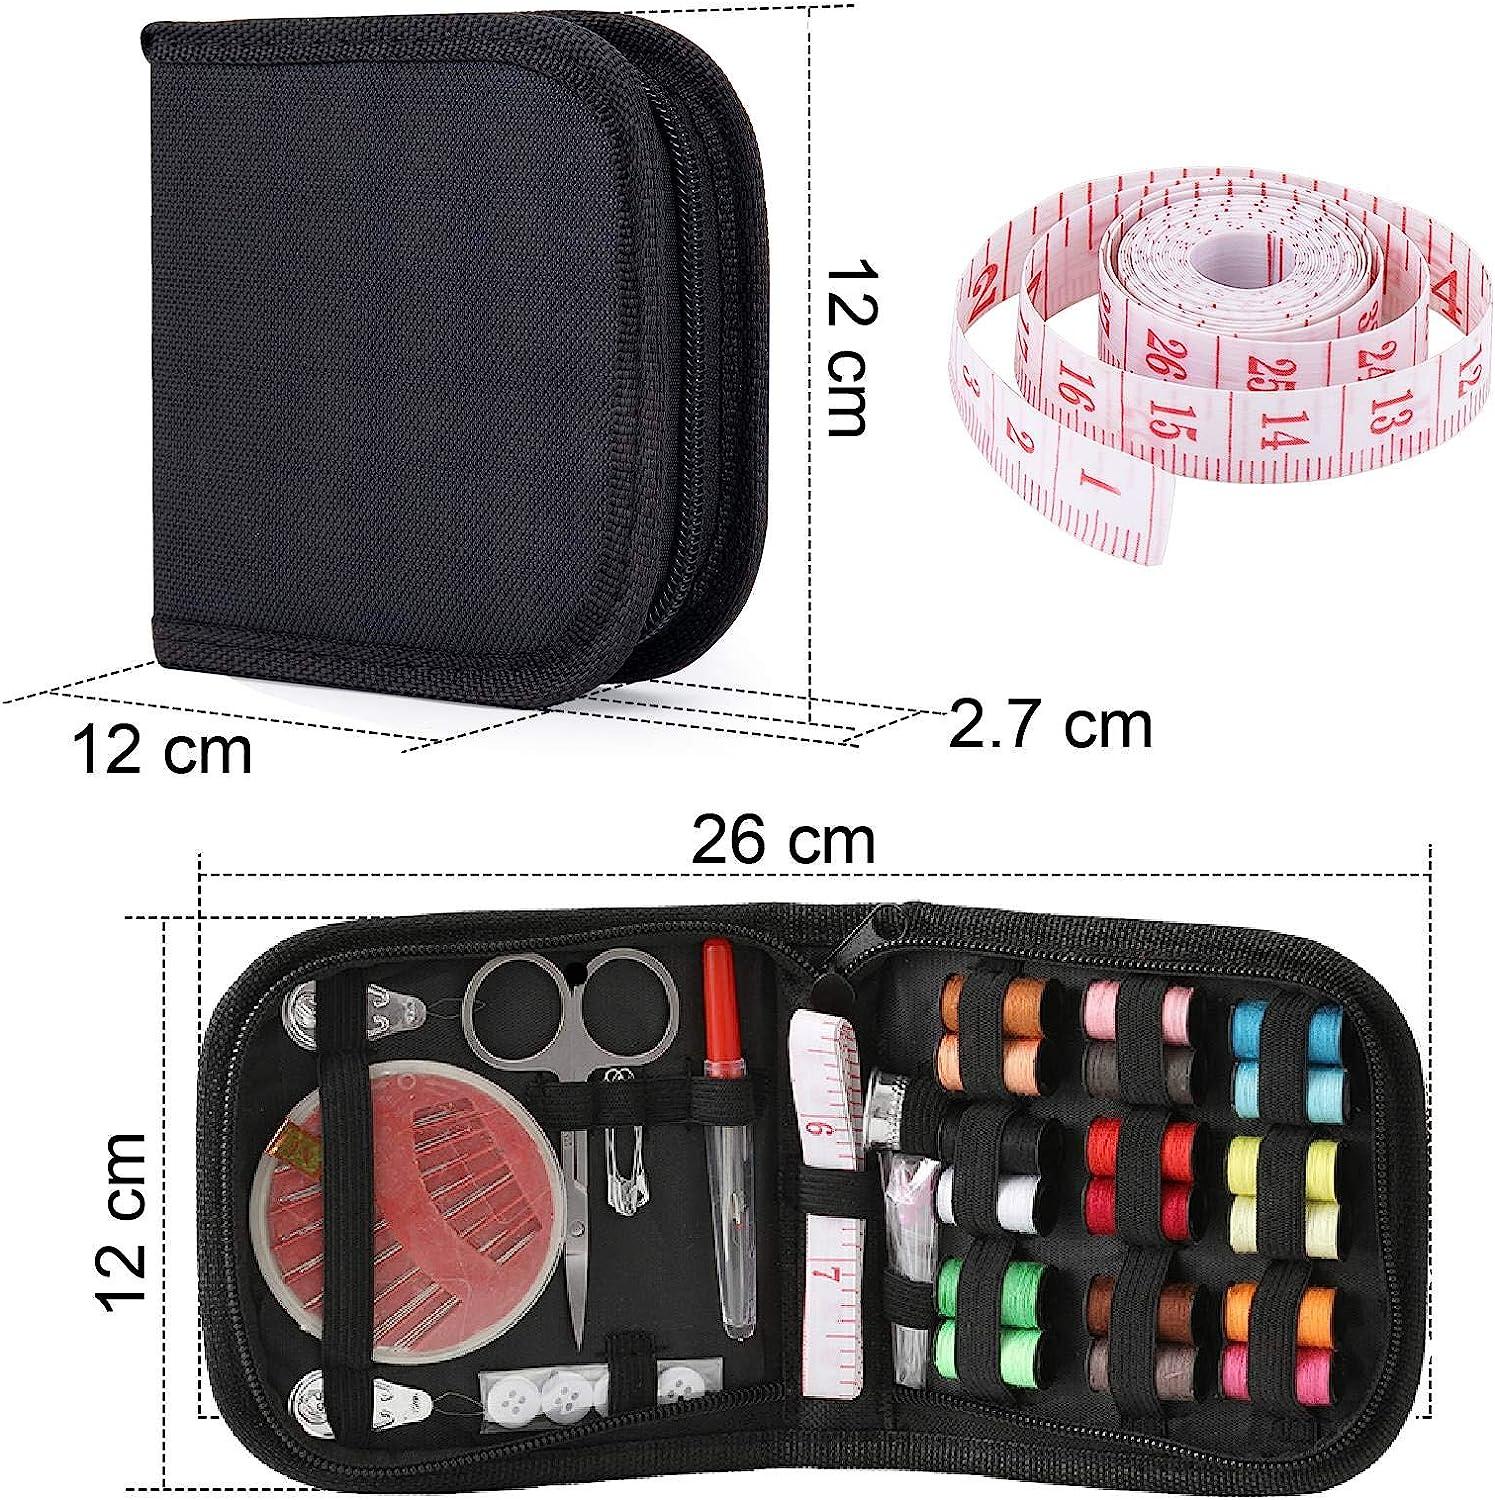 Sewing Kit for Adults - over 100 Sewing Supplies and Accessories